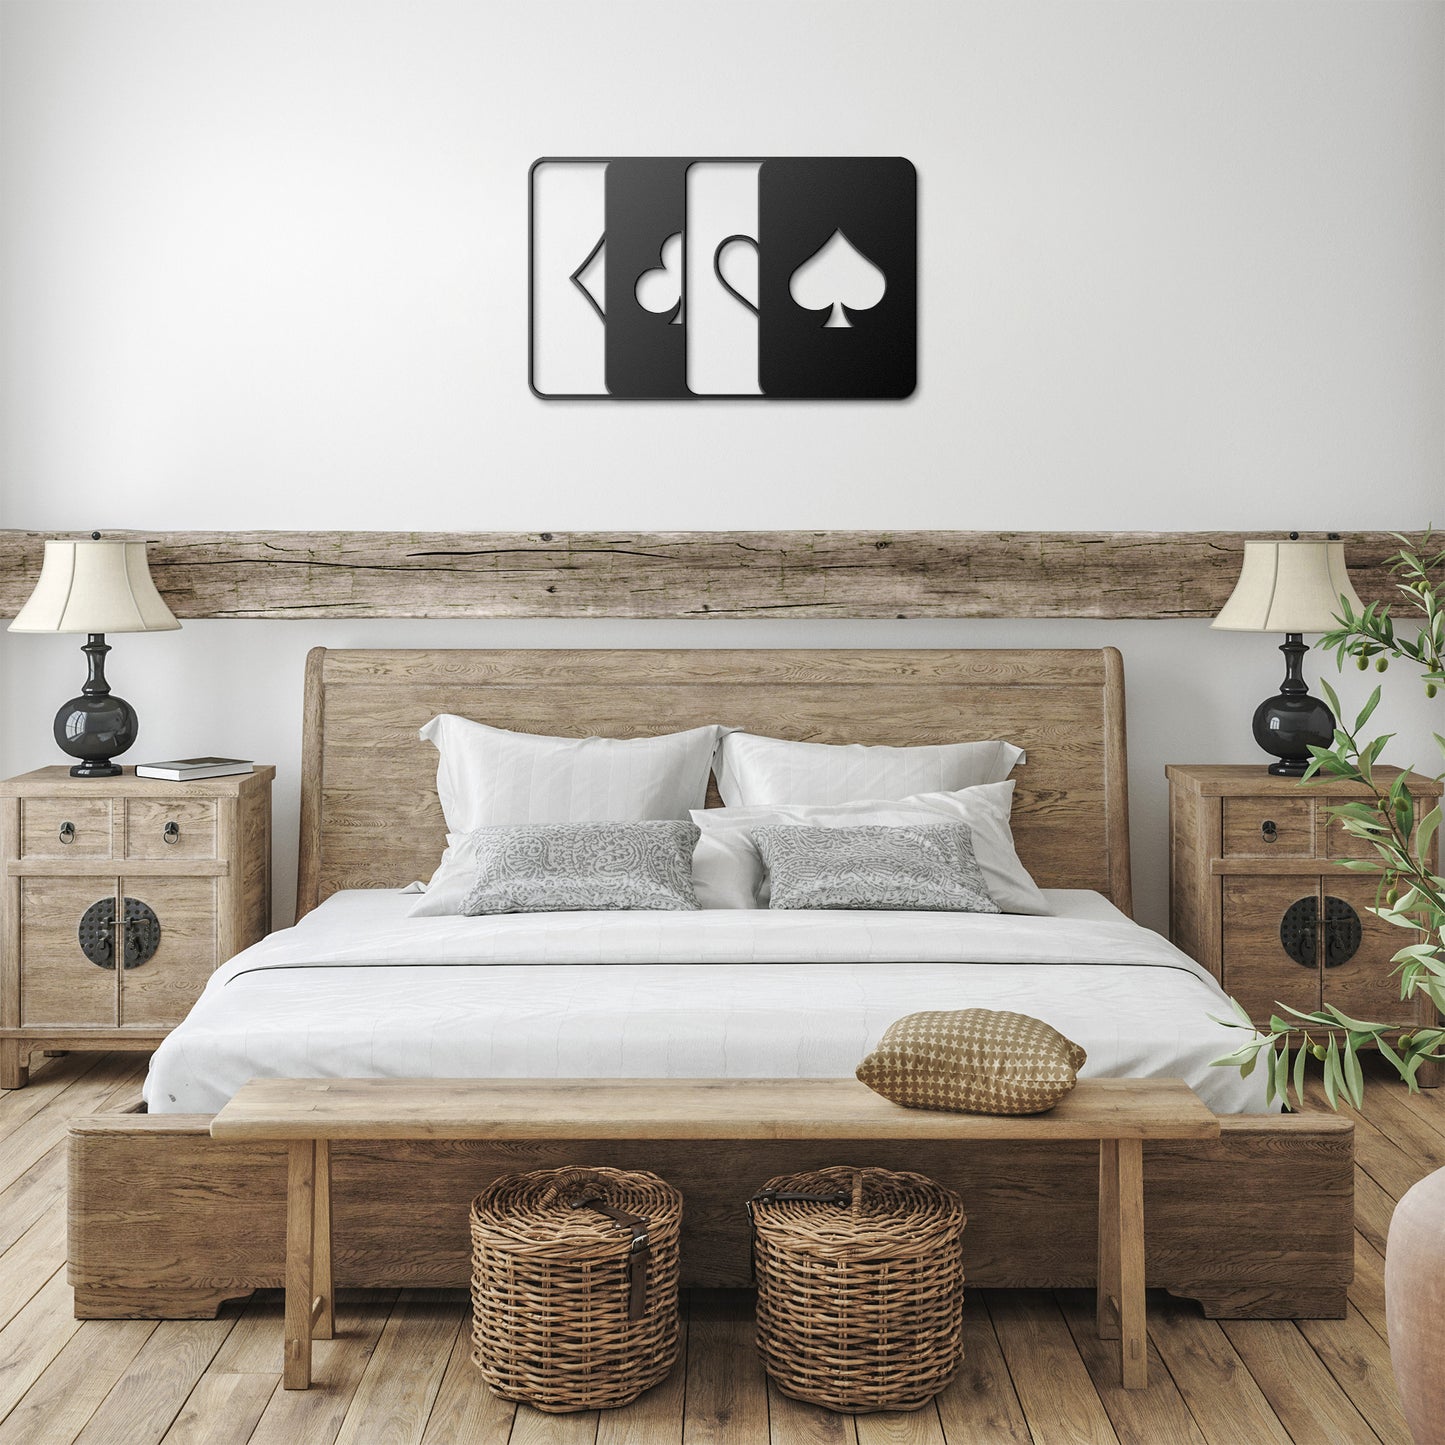 Four Suit Ace Metal Wall Art